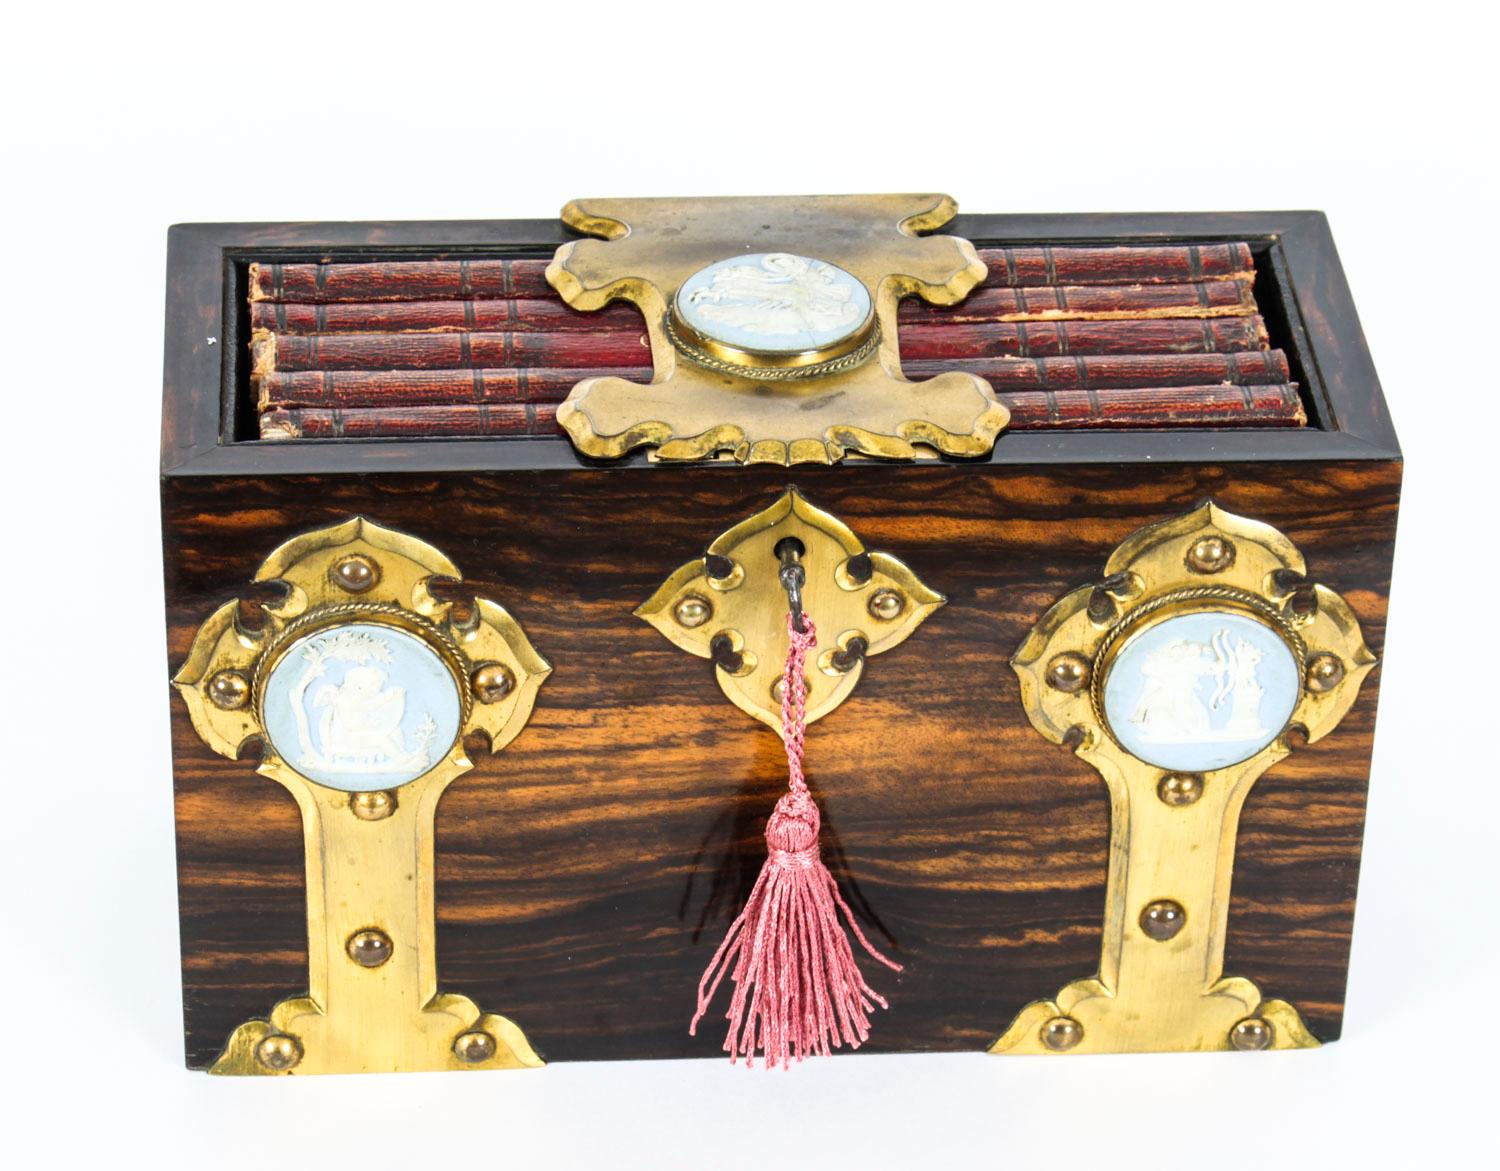 A very fine antique Victorian Coromandel personal book holder attributed to the world famous London box makers Betjemann & Sons, circa 1870 in date.
 
The rectangular box features gothic revival brass strap work mounts set with Wedgwood jasper